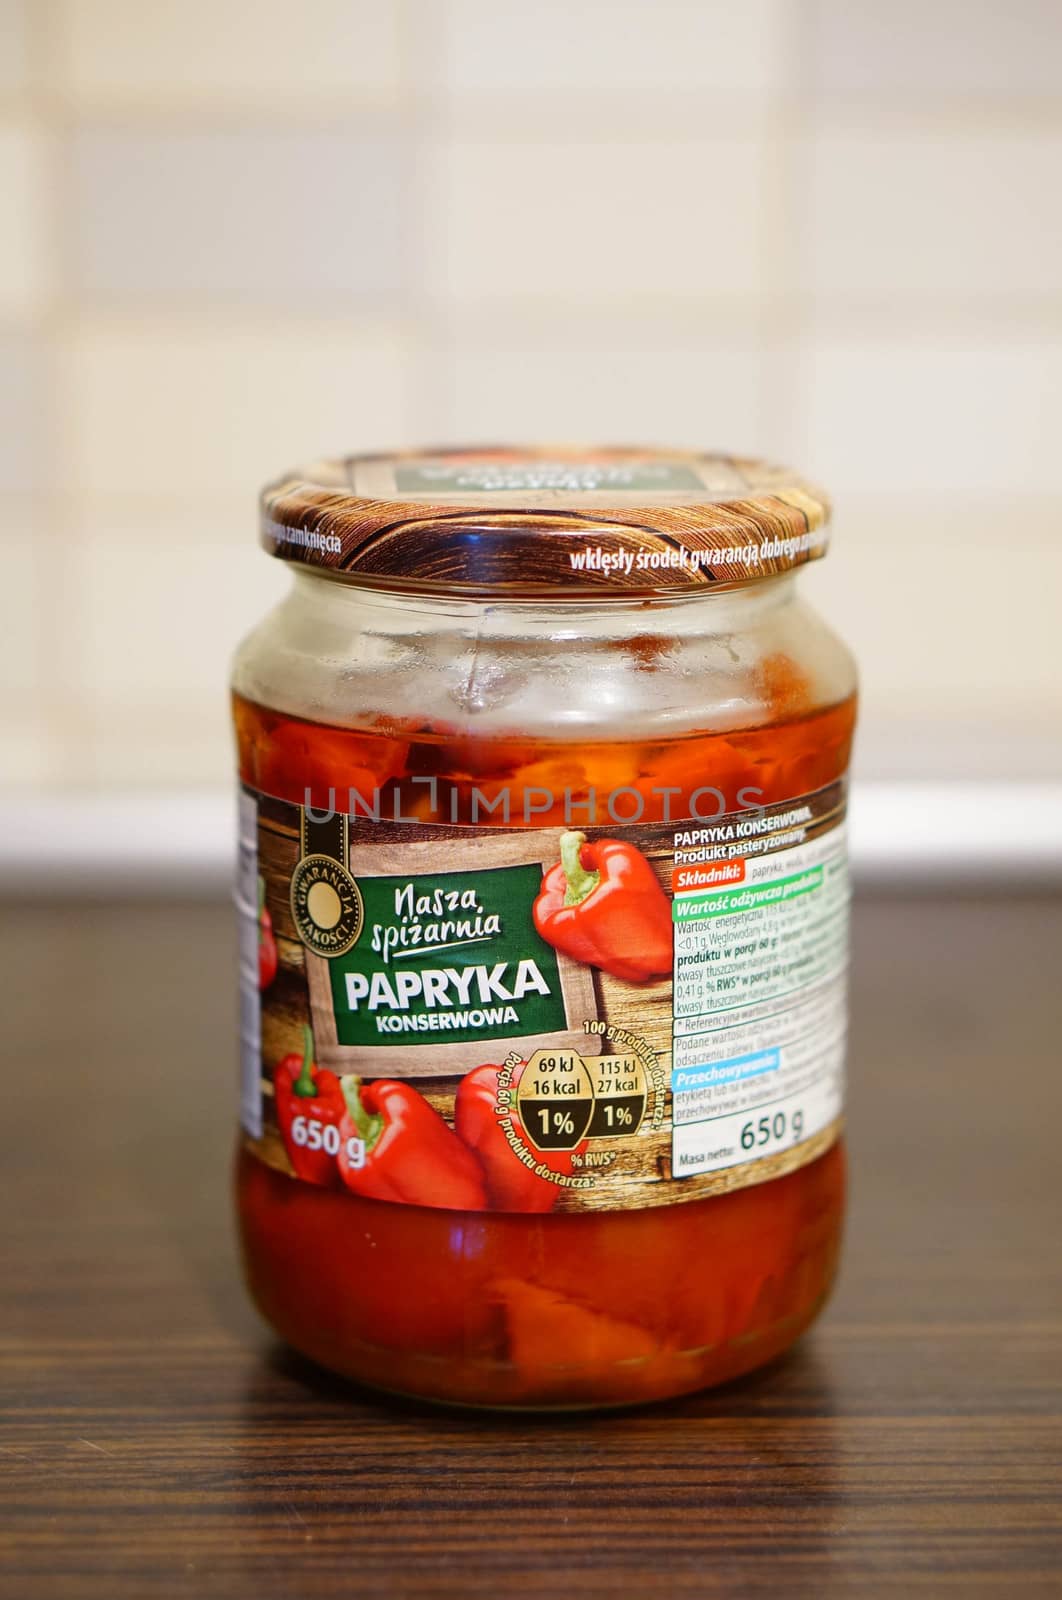 POZNAN, POLAND - SEPTEMBER 24, 2015: Red pepper in a glass jar standing on table